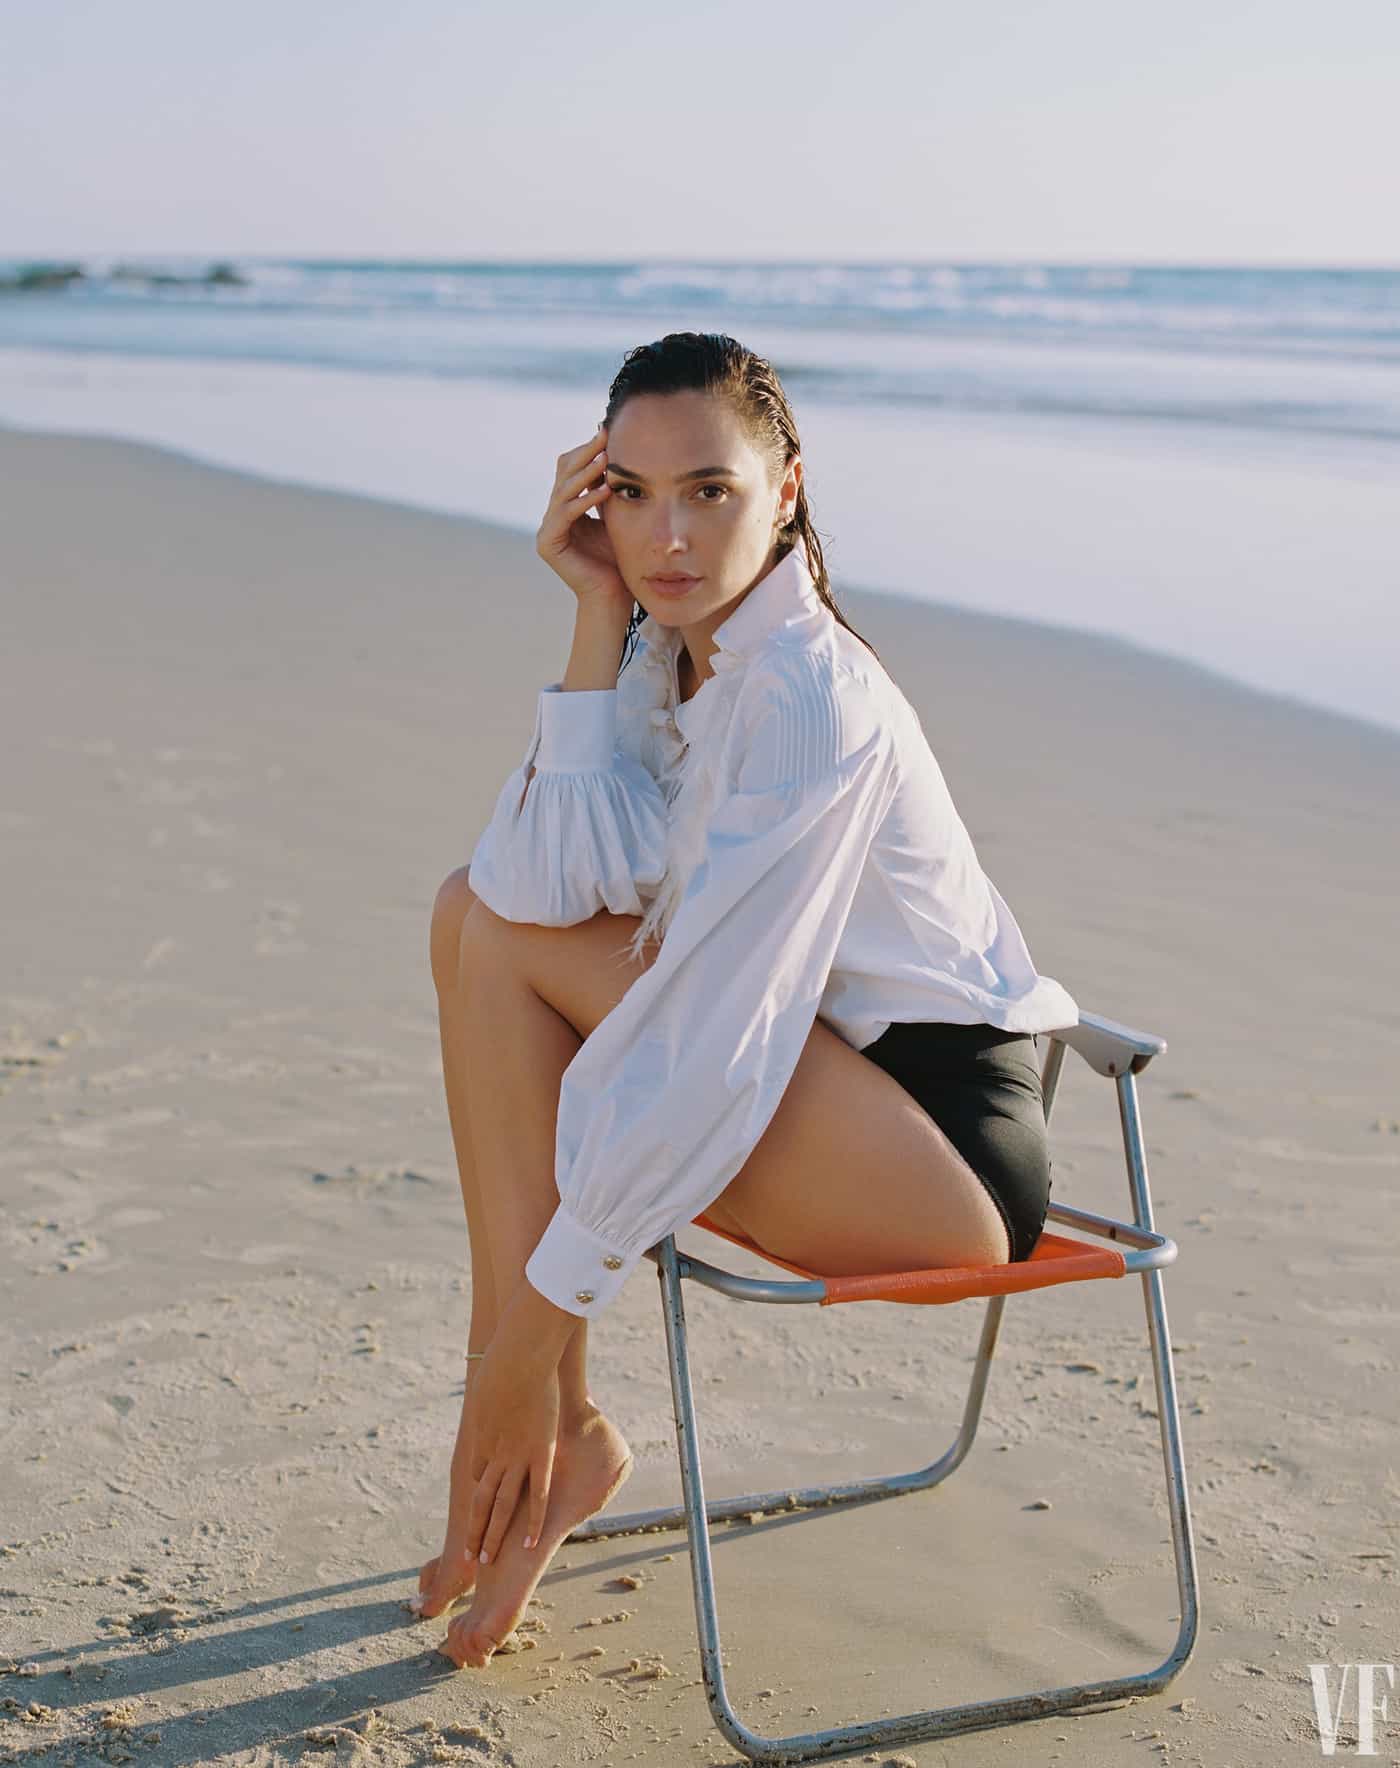 Gal Gadot is the Cover Star of Vanity Fair November 2020 Issue